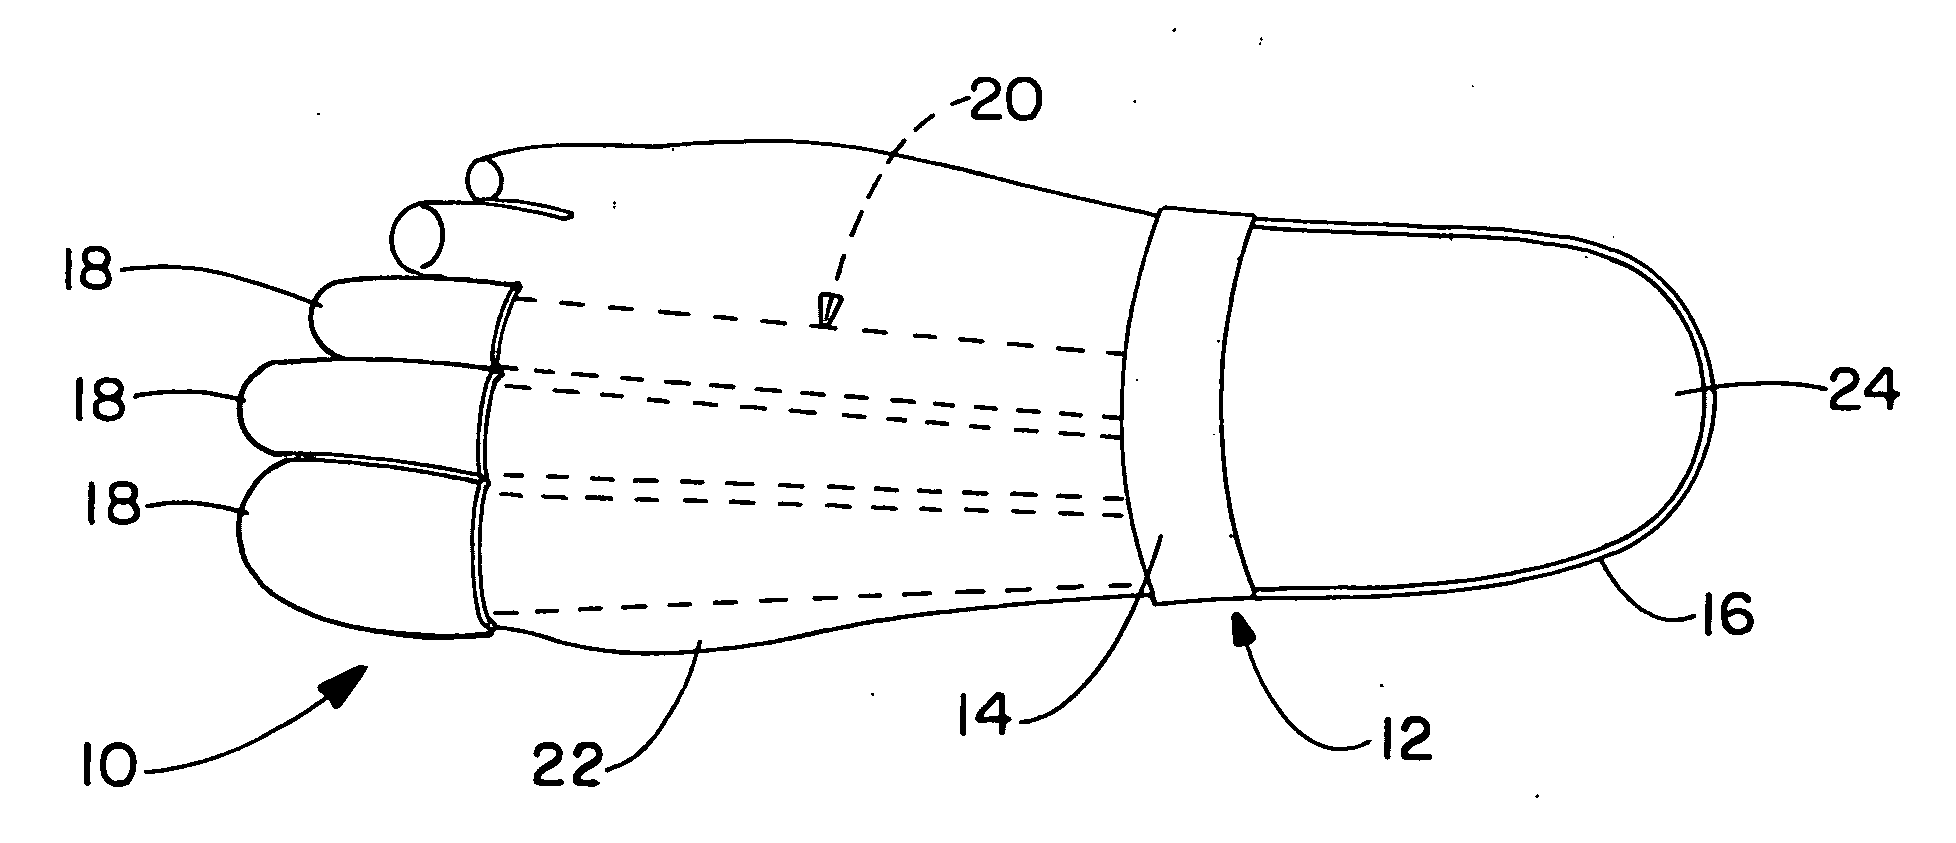 Therapeutic foot appliance and method of use